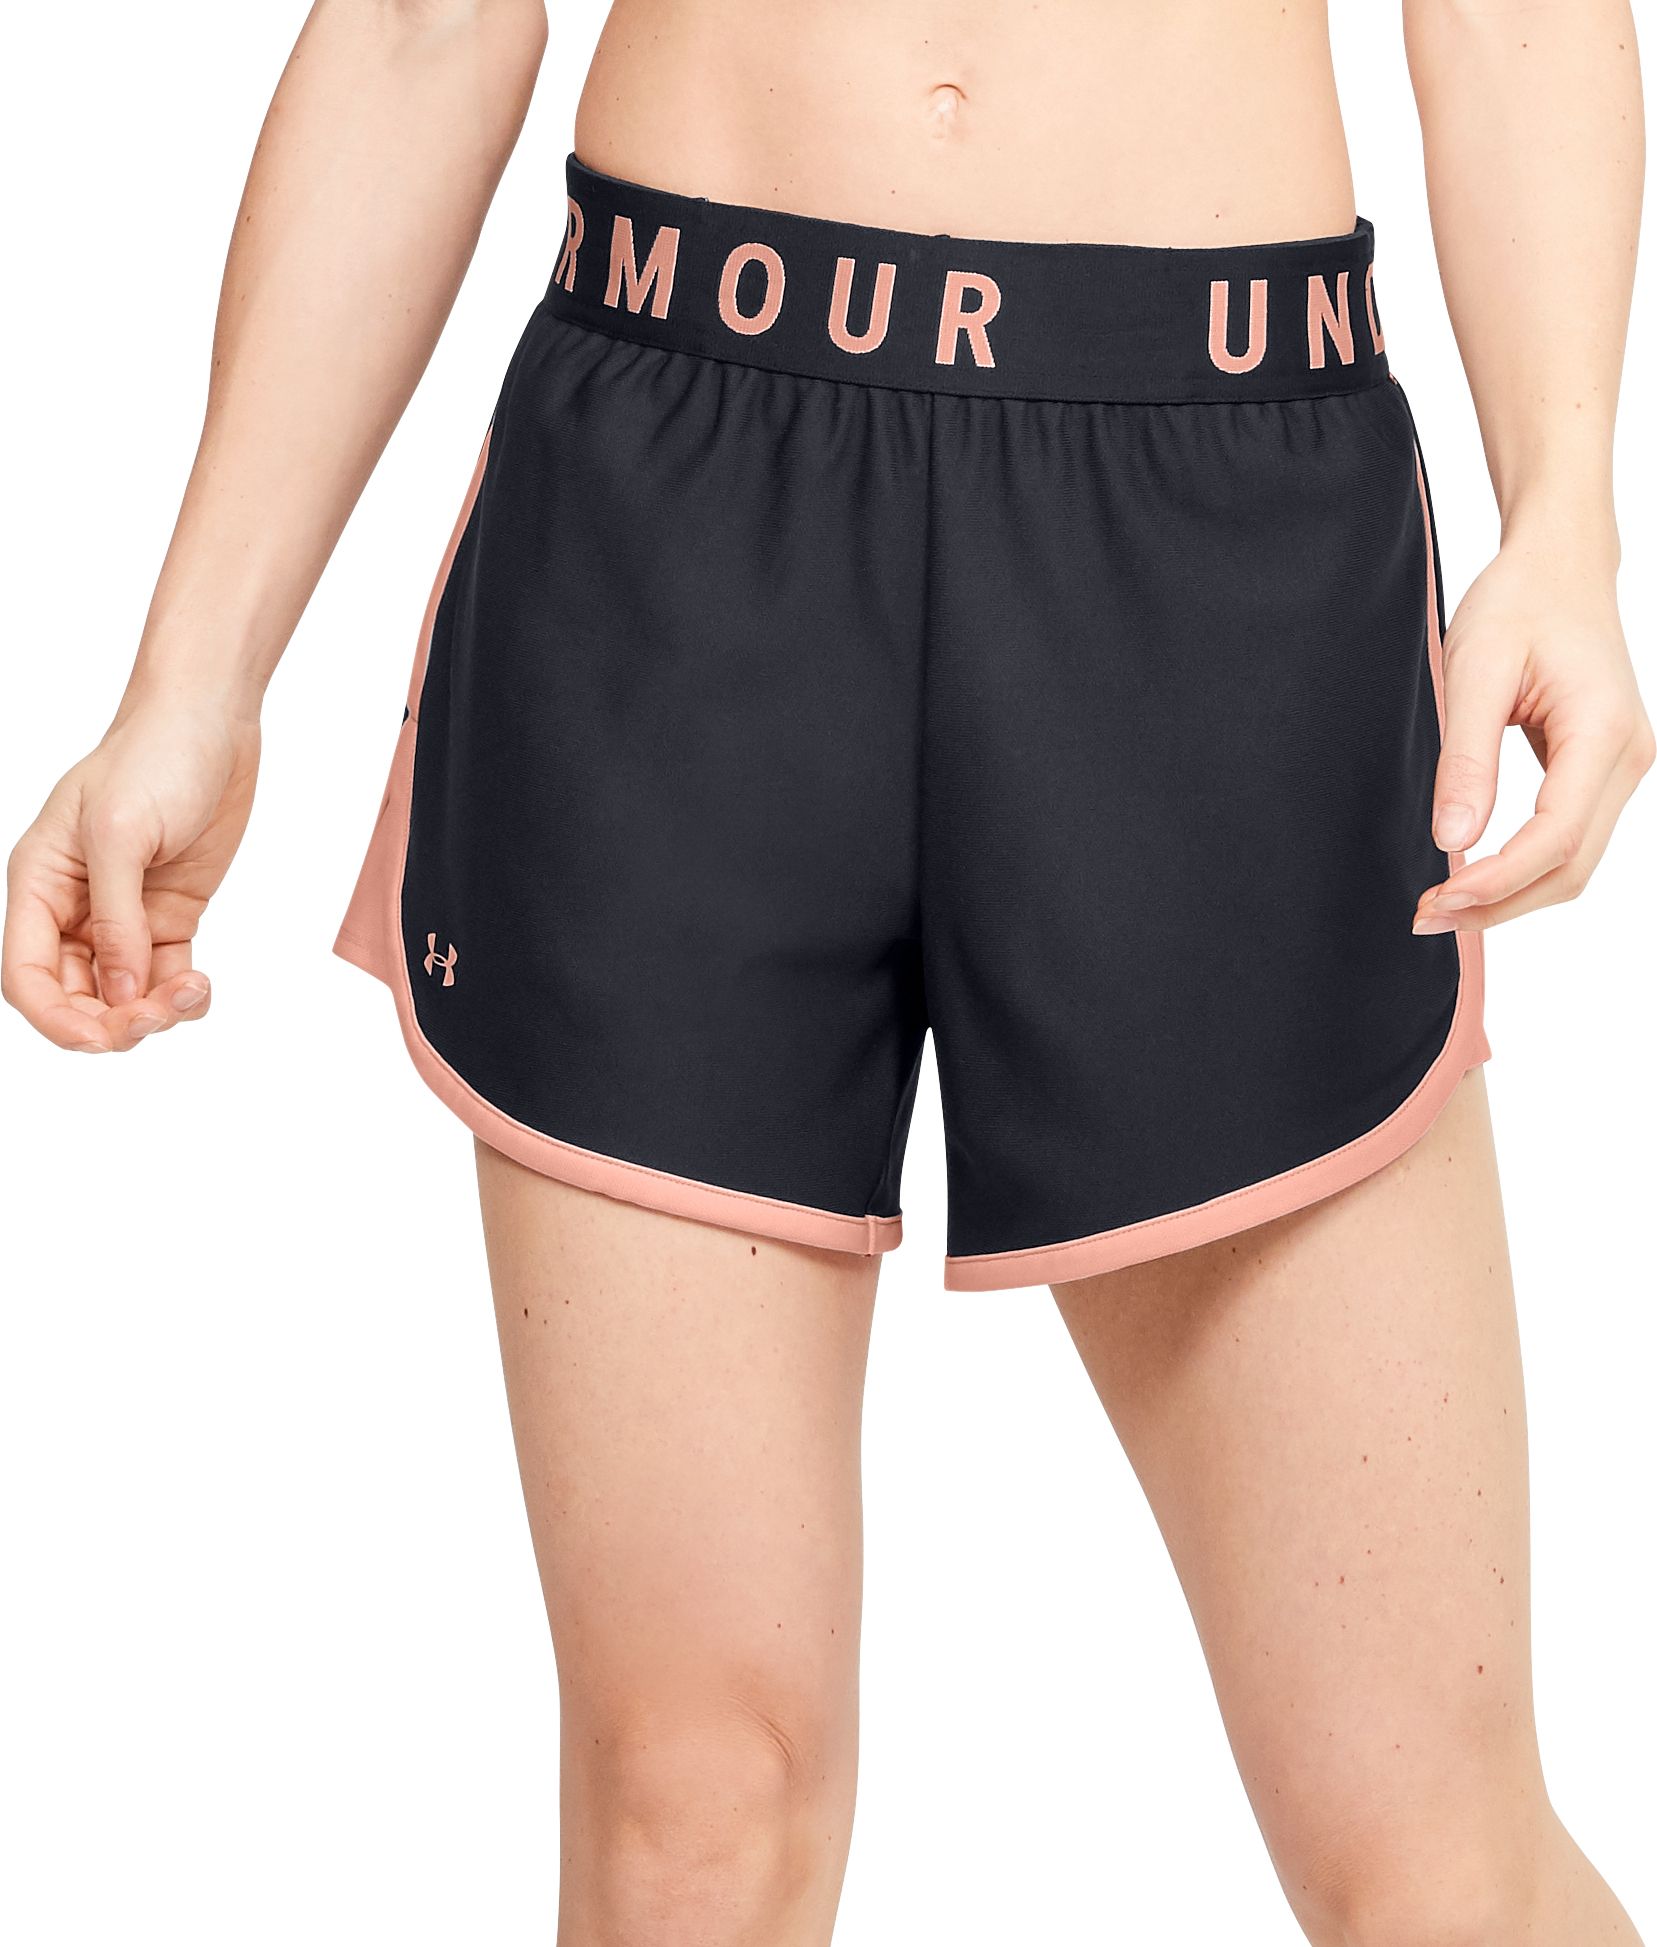 under armour shorts womens play up